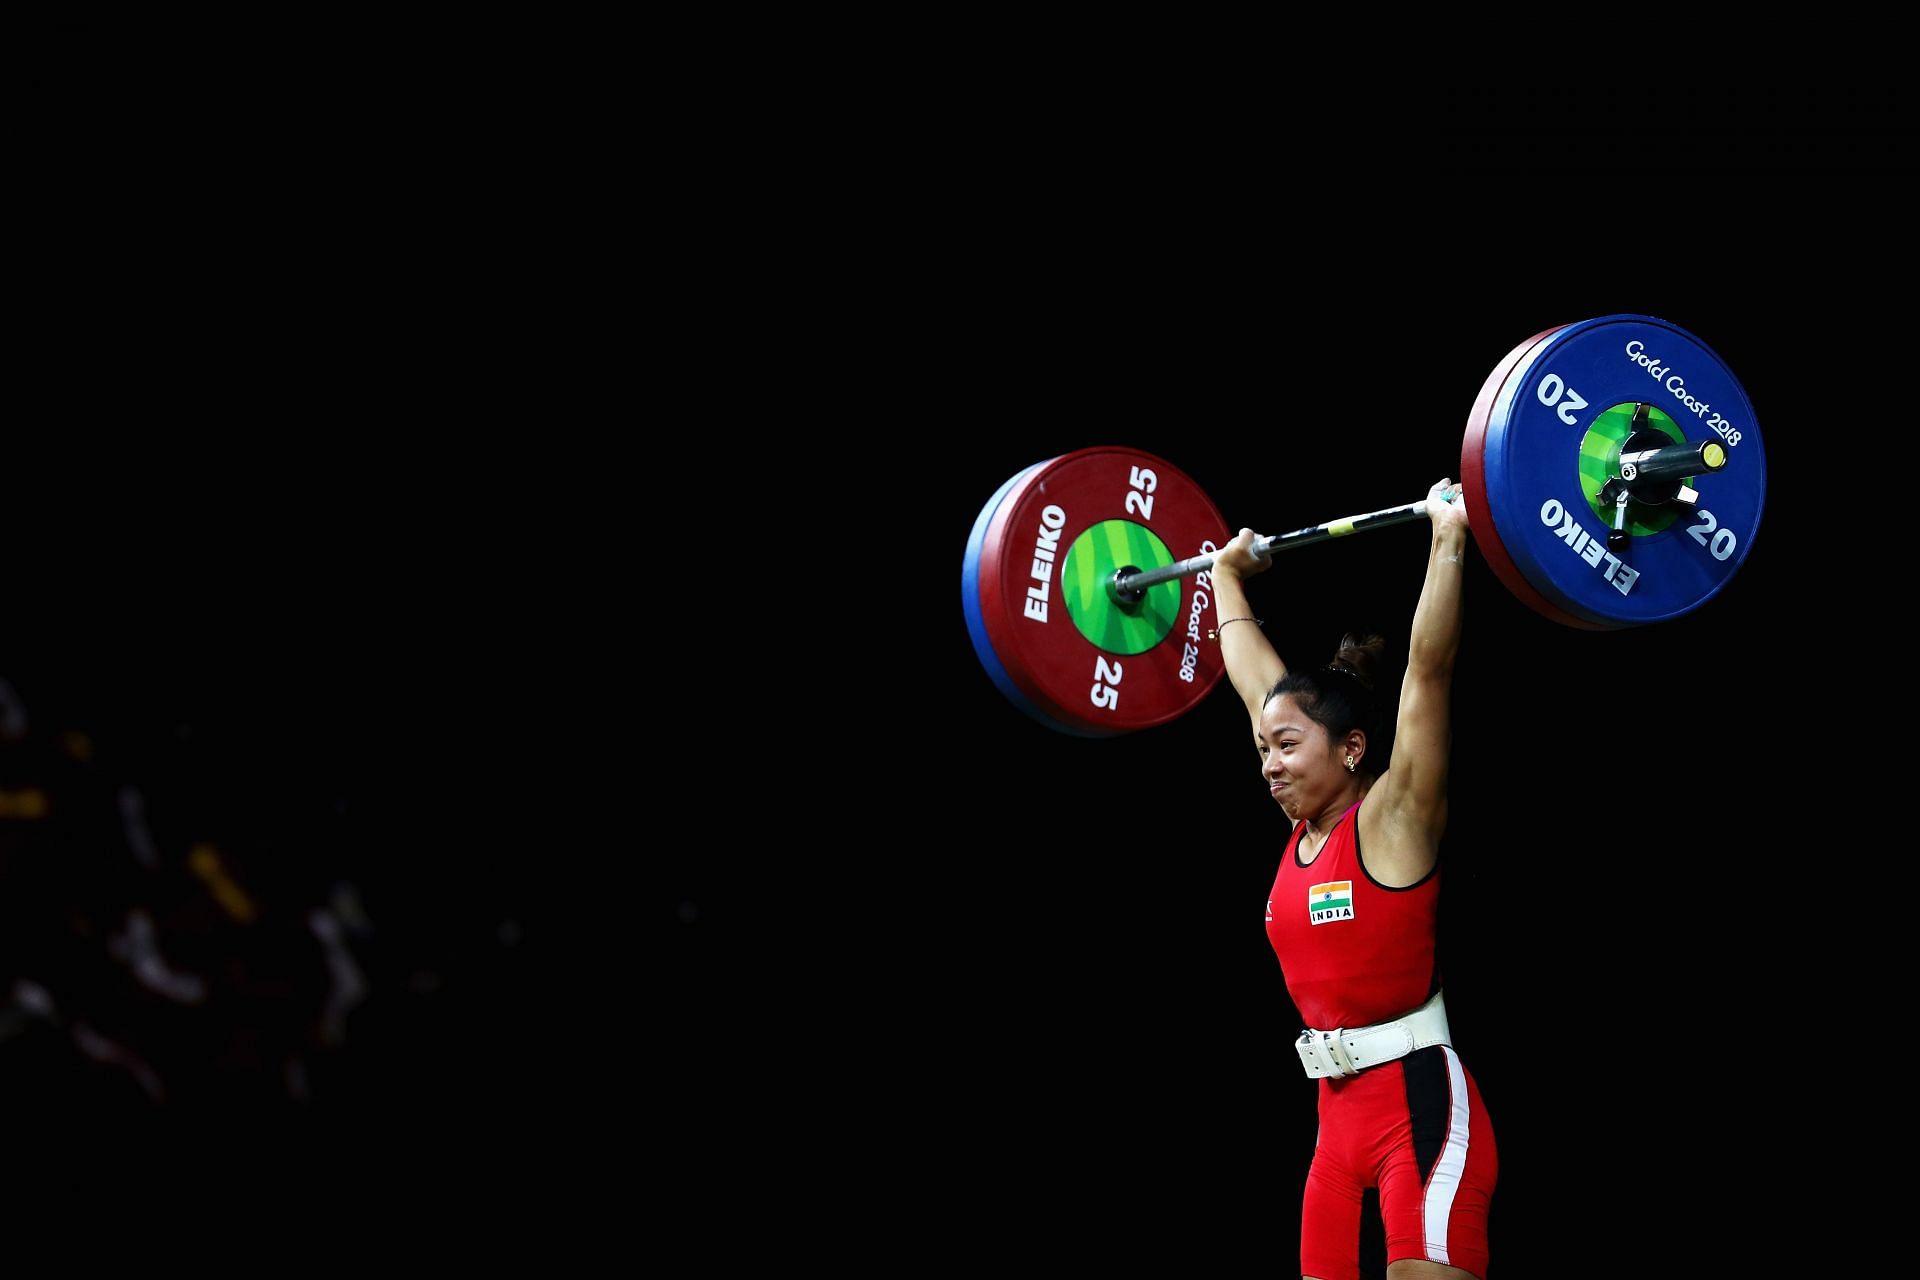 Weightlifter Mirabai Chanu won a gold medal at the Singapore International. (PC: Getty Images)